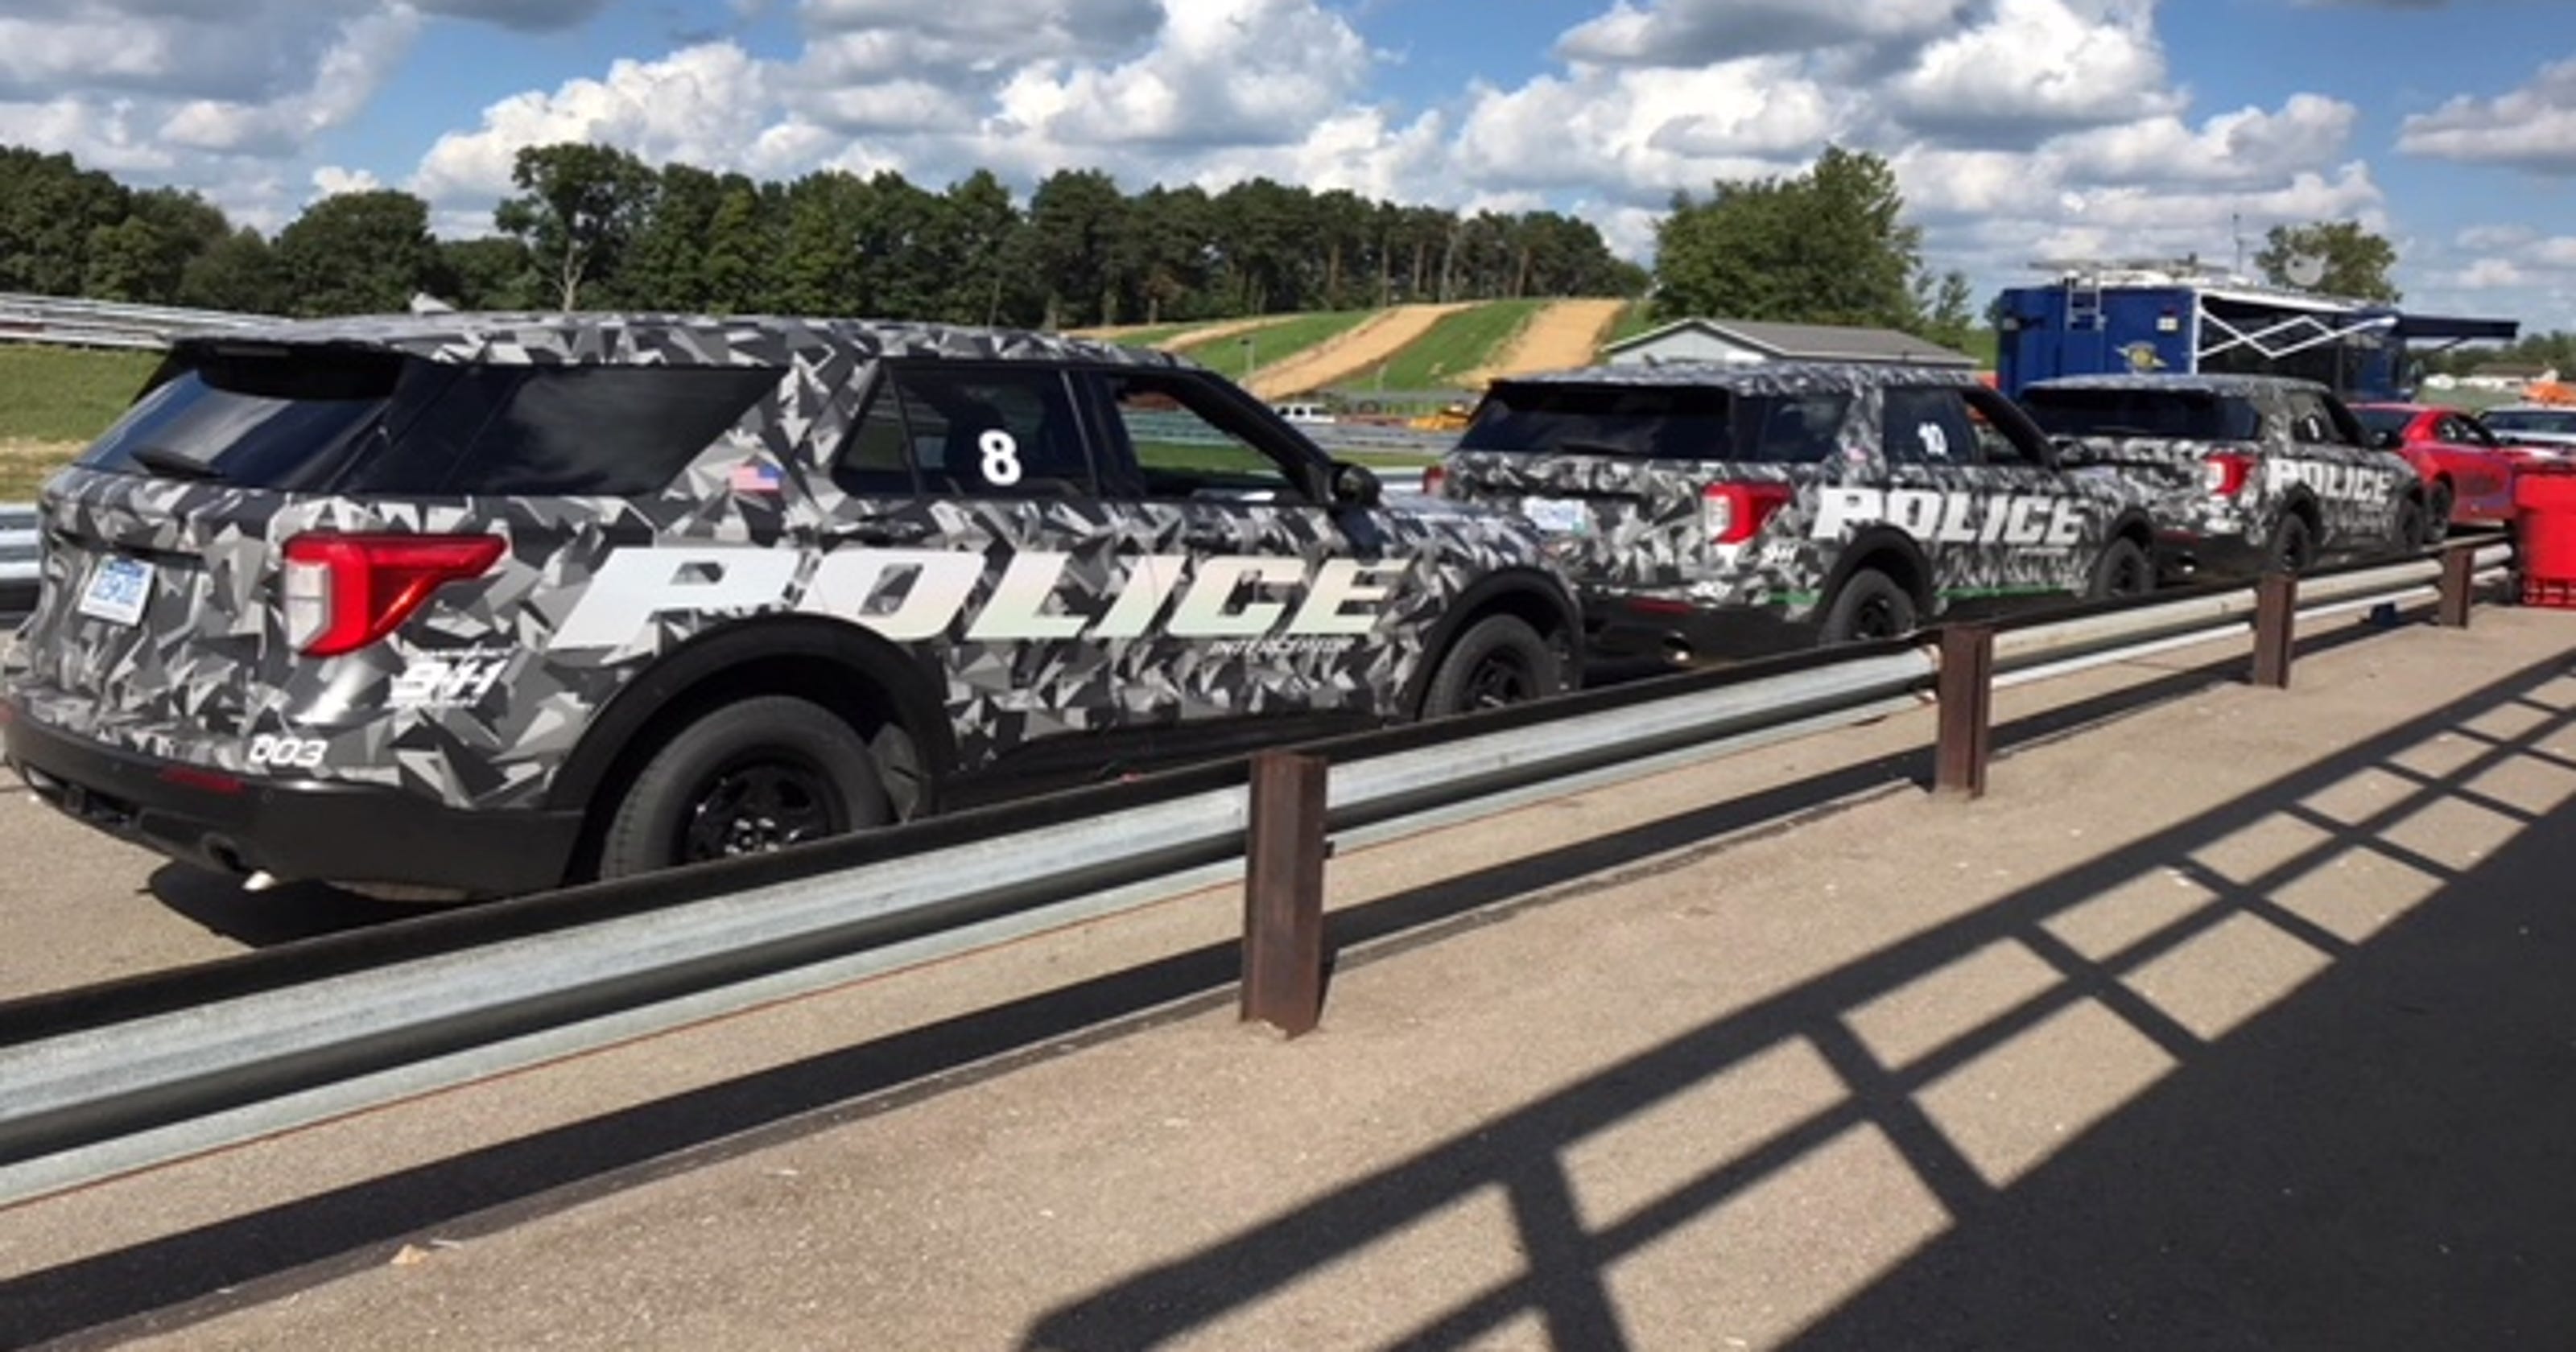 Fastest Cop Car Is Ford Police Interceptor Reaches 150 Mph 